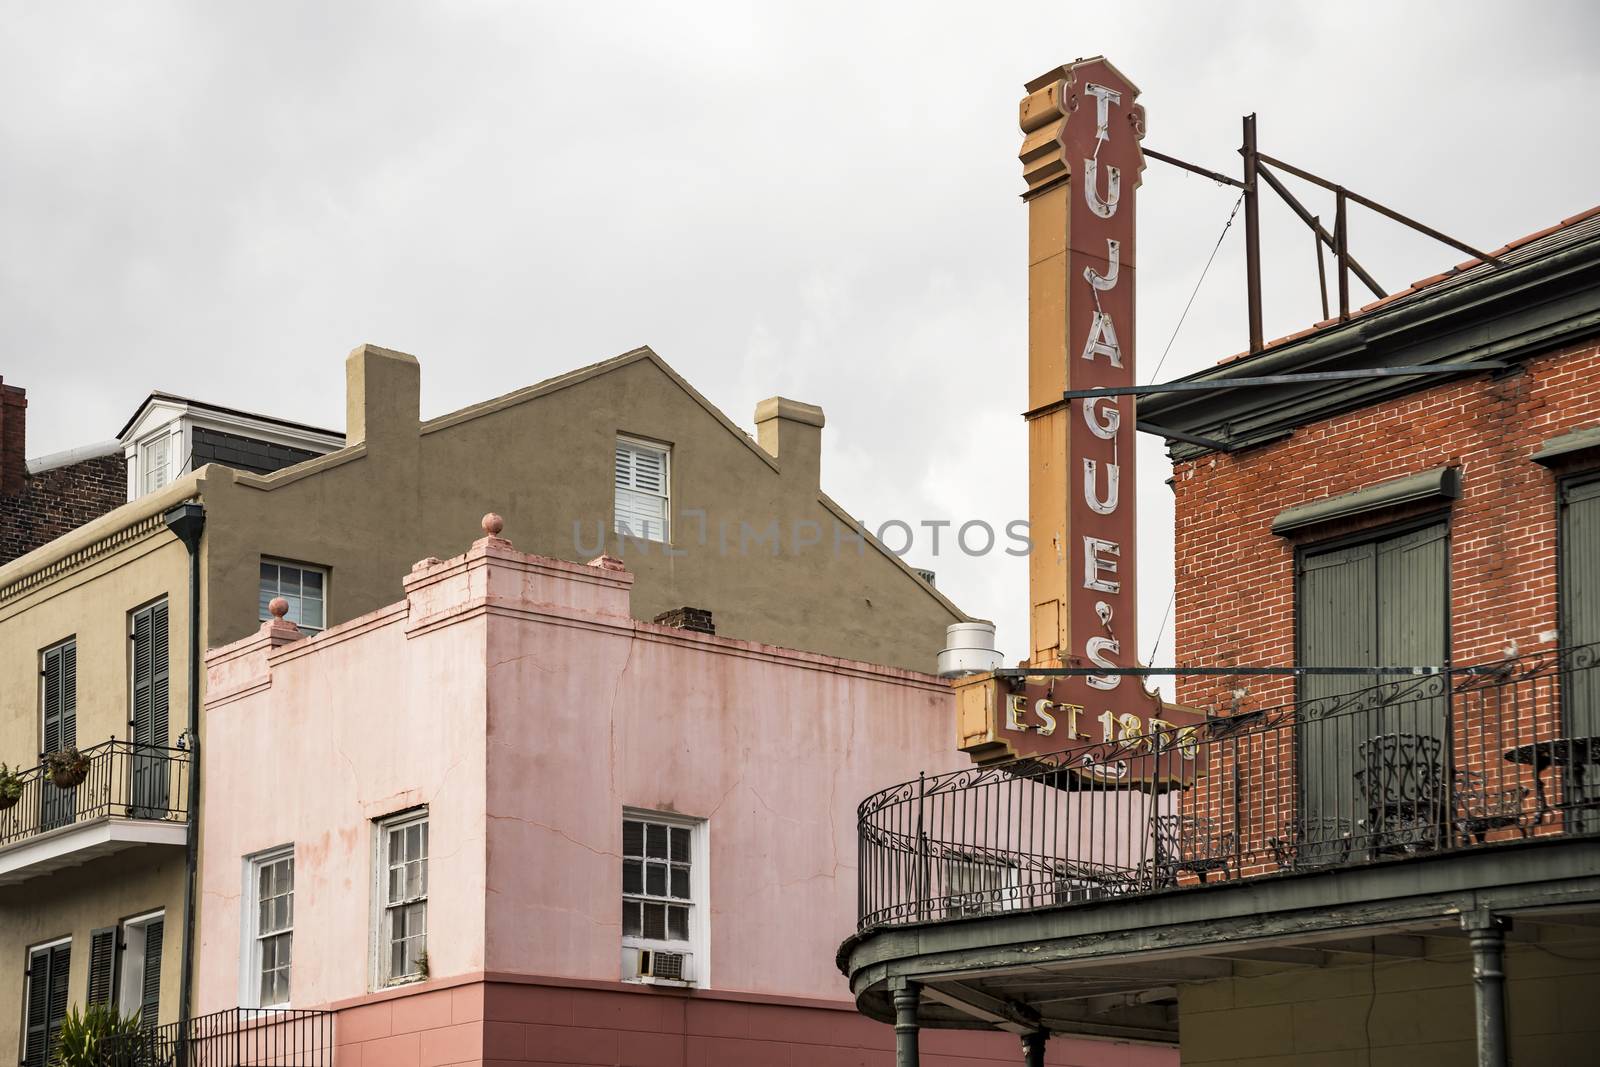 Architecture of the French Quarter in New Orleans by edella